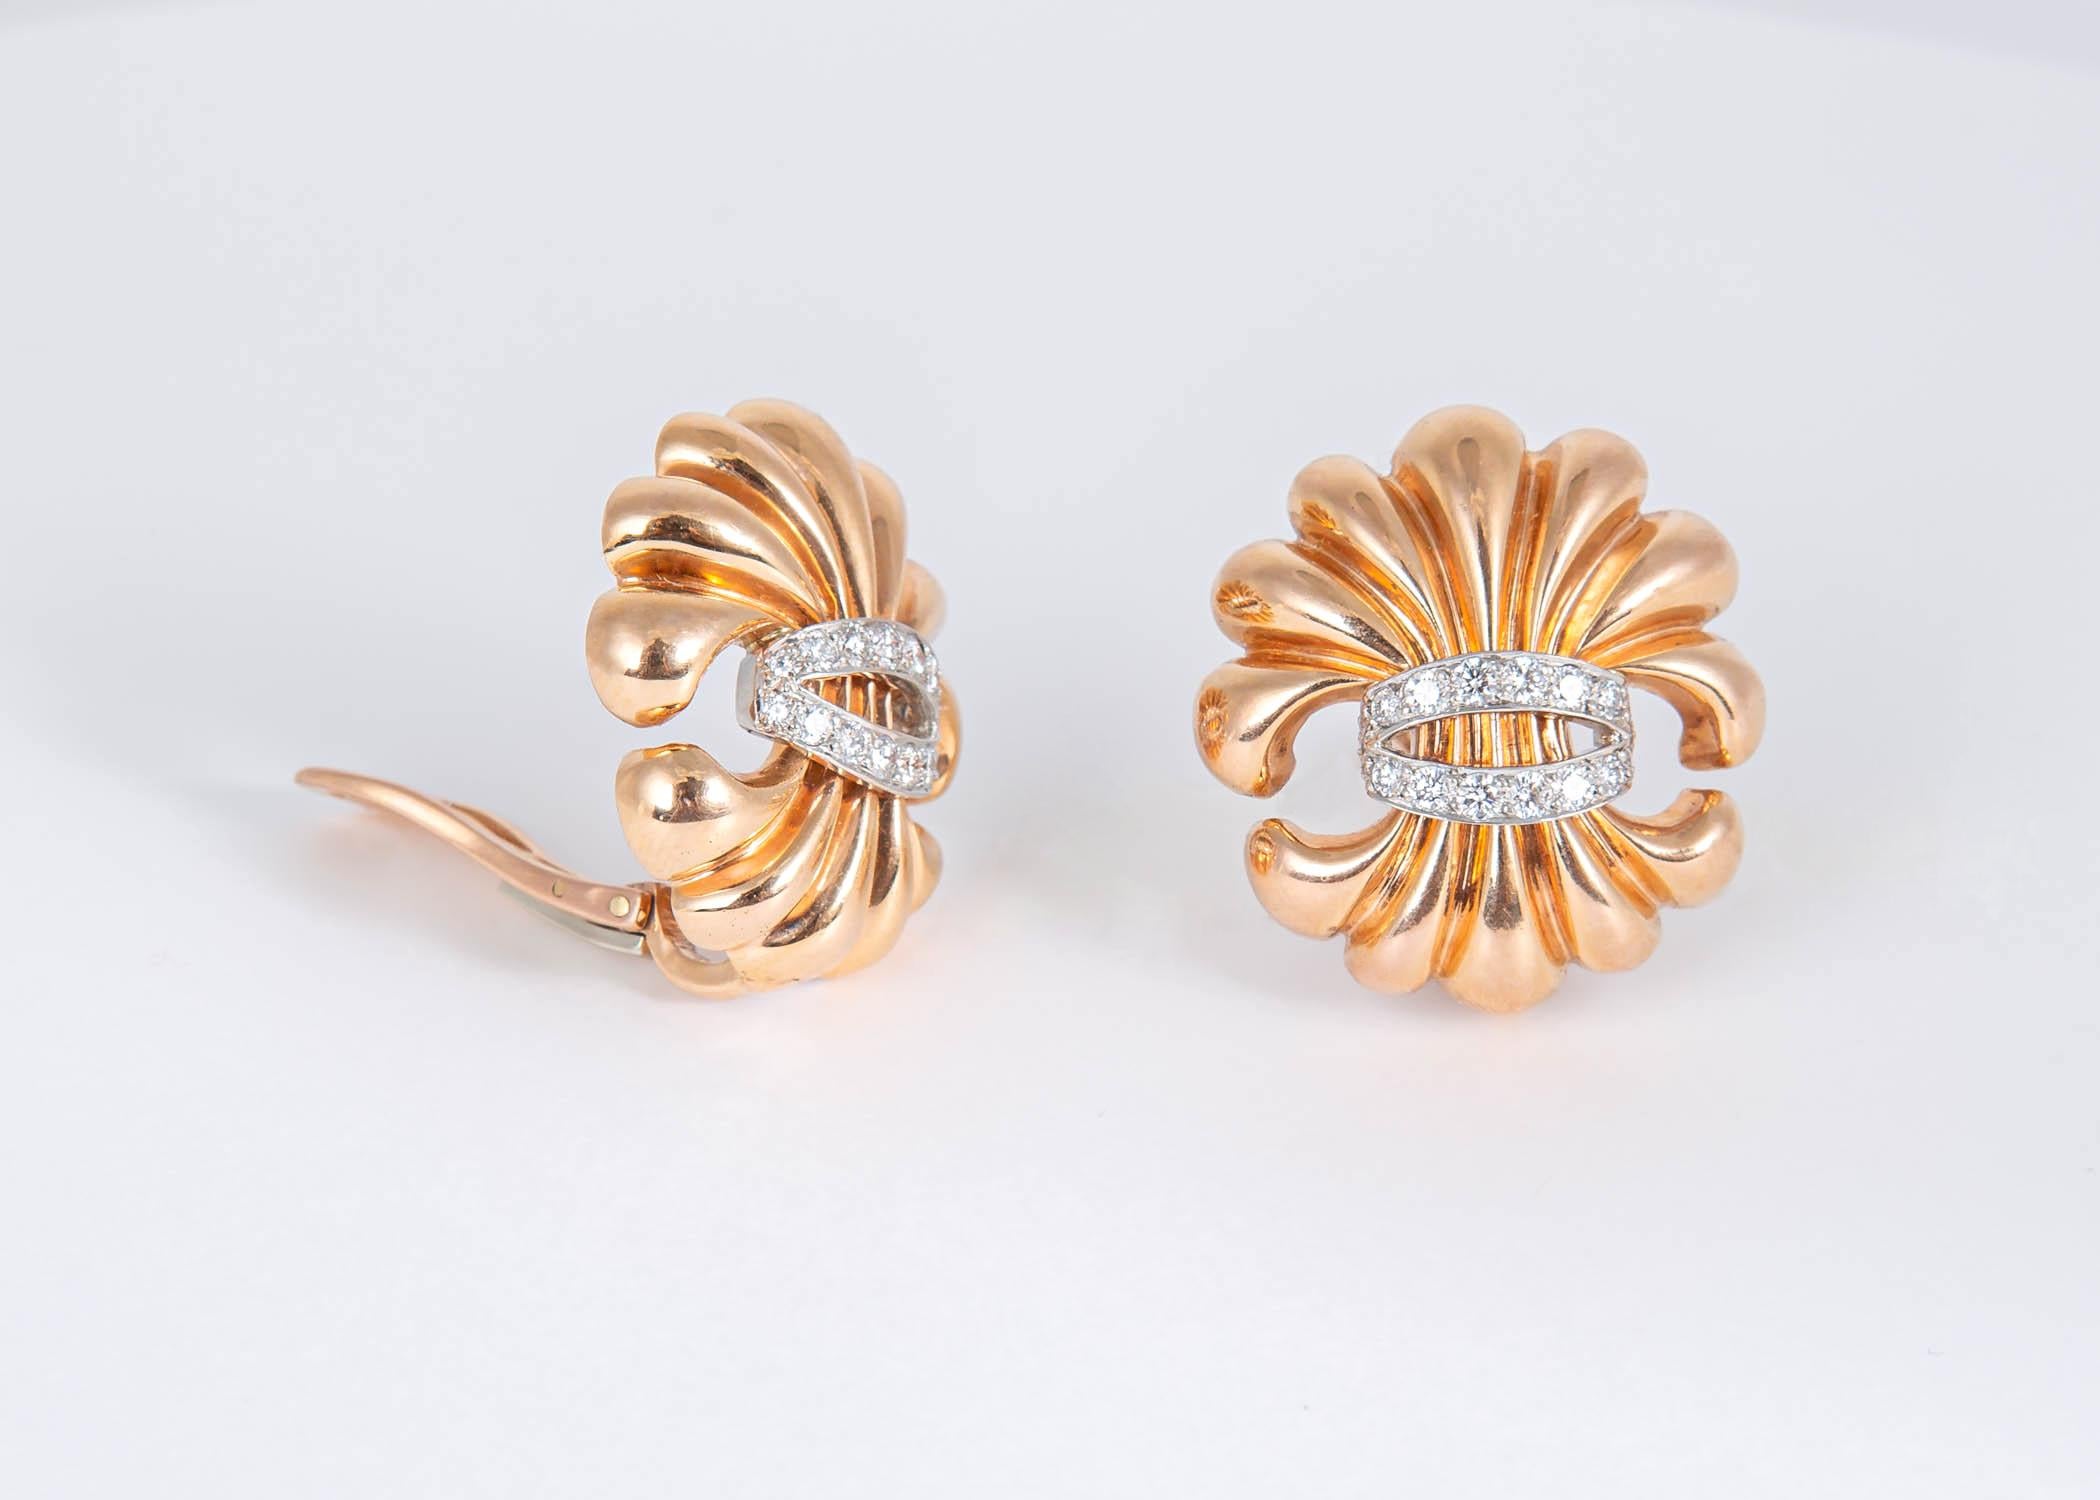 The Verdura Fleur-de-lis rose gold earrings are rare and collectable. A truly elegant design accented with brilliant cut diamonds. Approximately 1 1/8 inches in size.